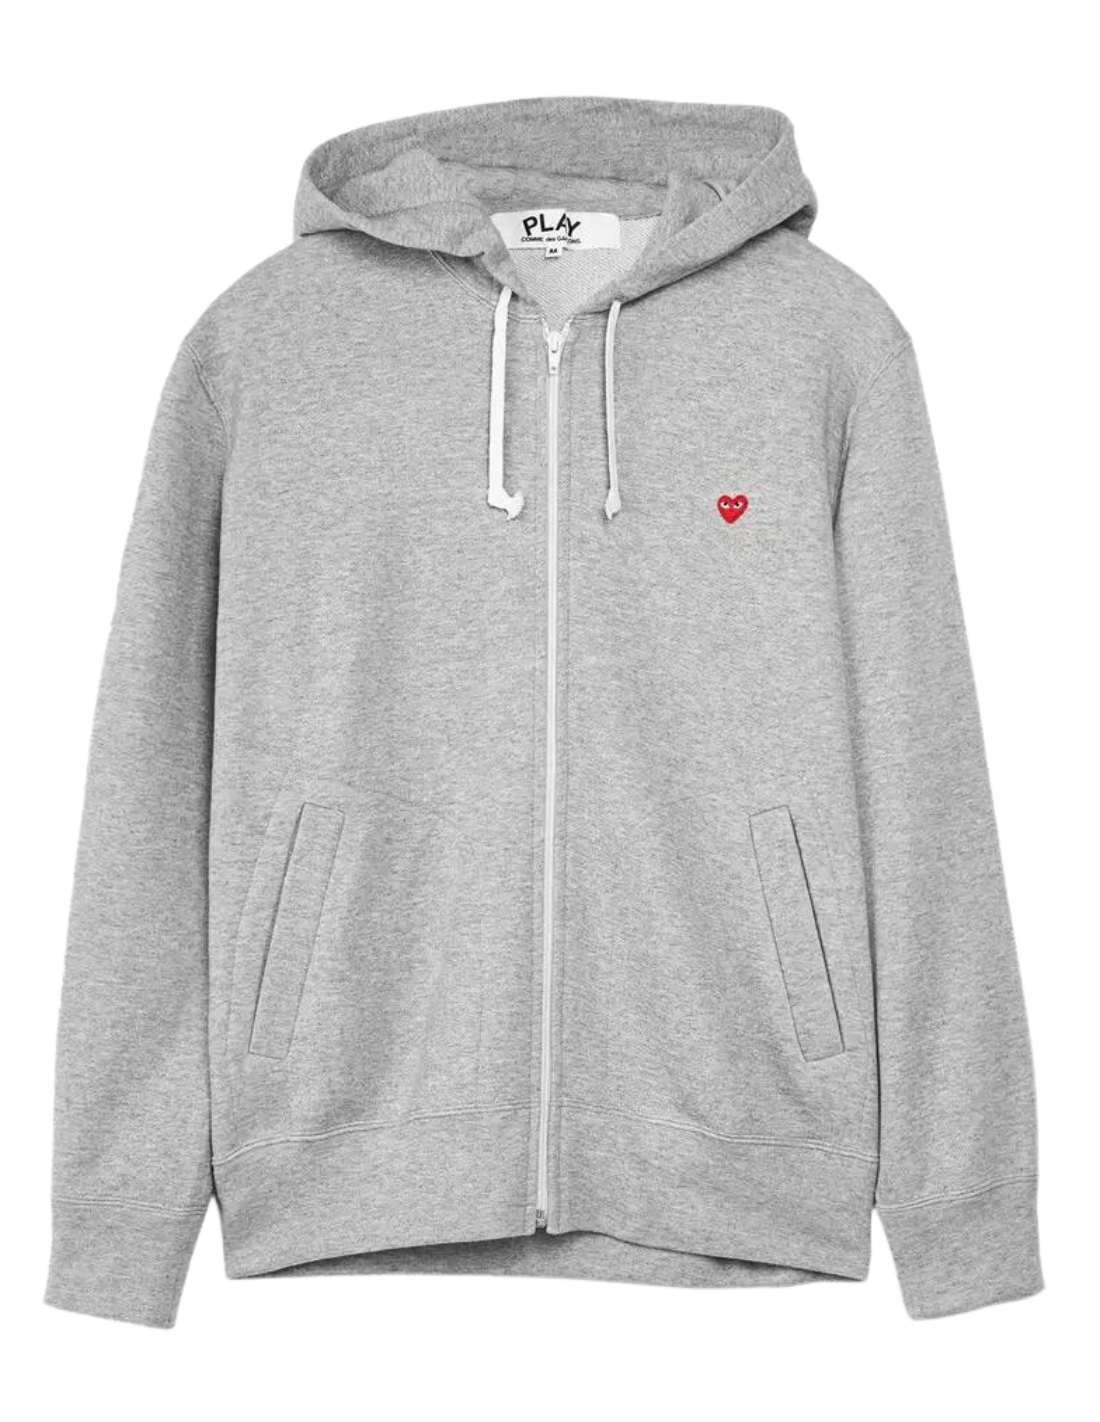 Comme Des Garçons Play hoodie with mini red heart embroidered - grey